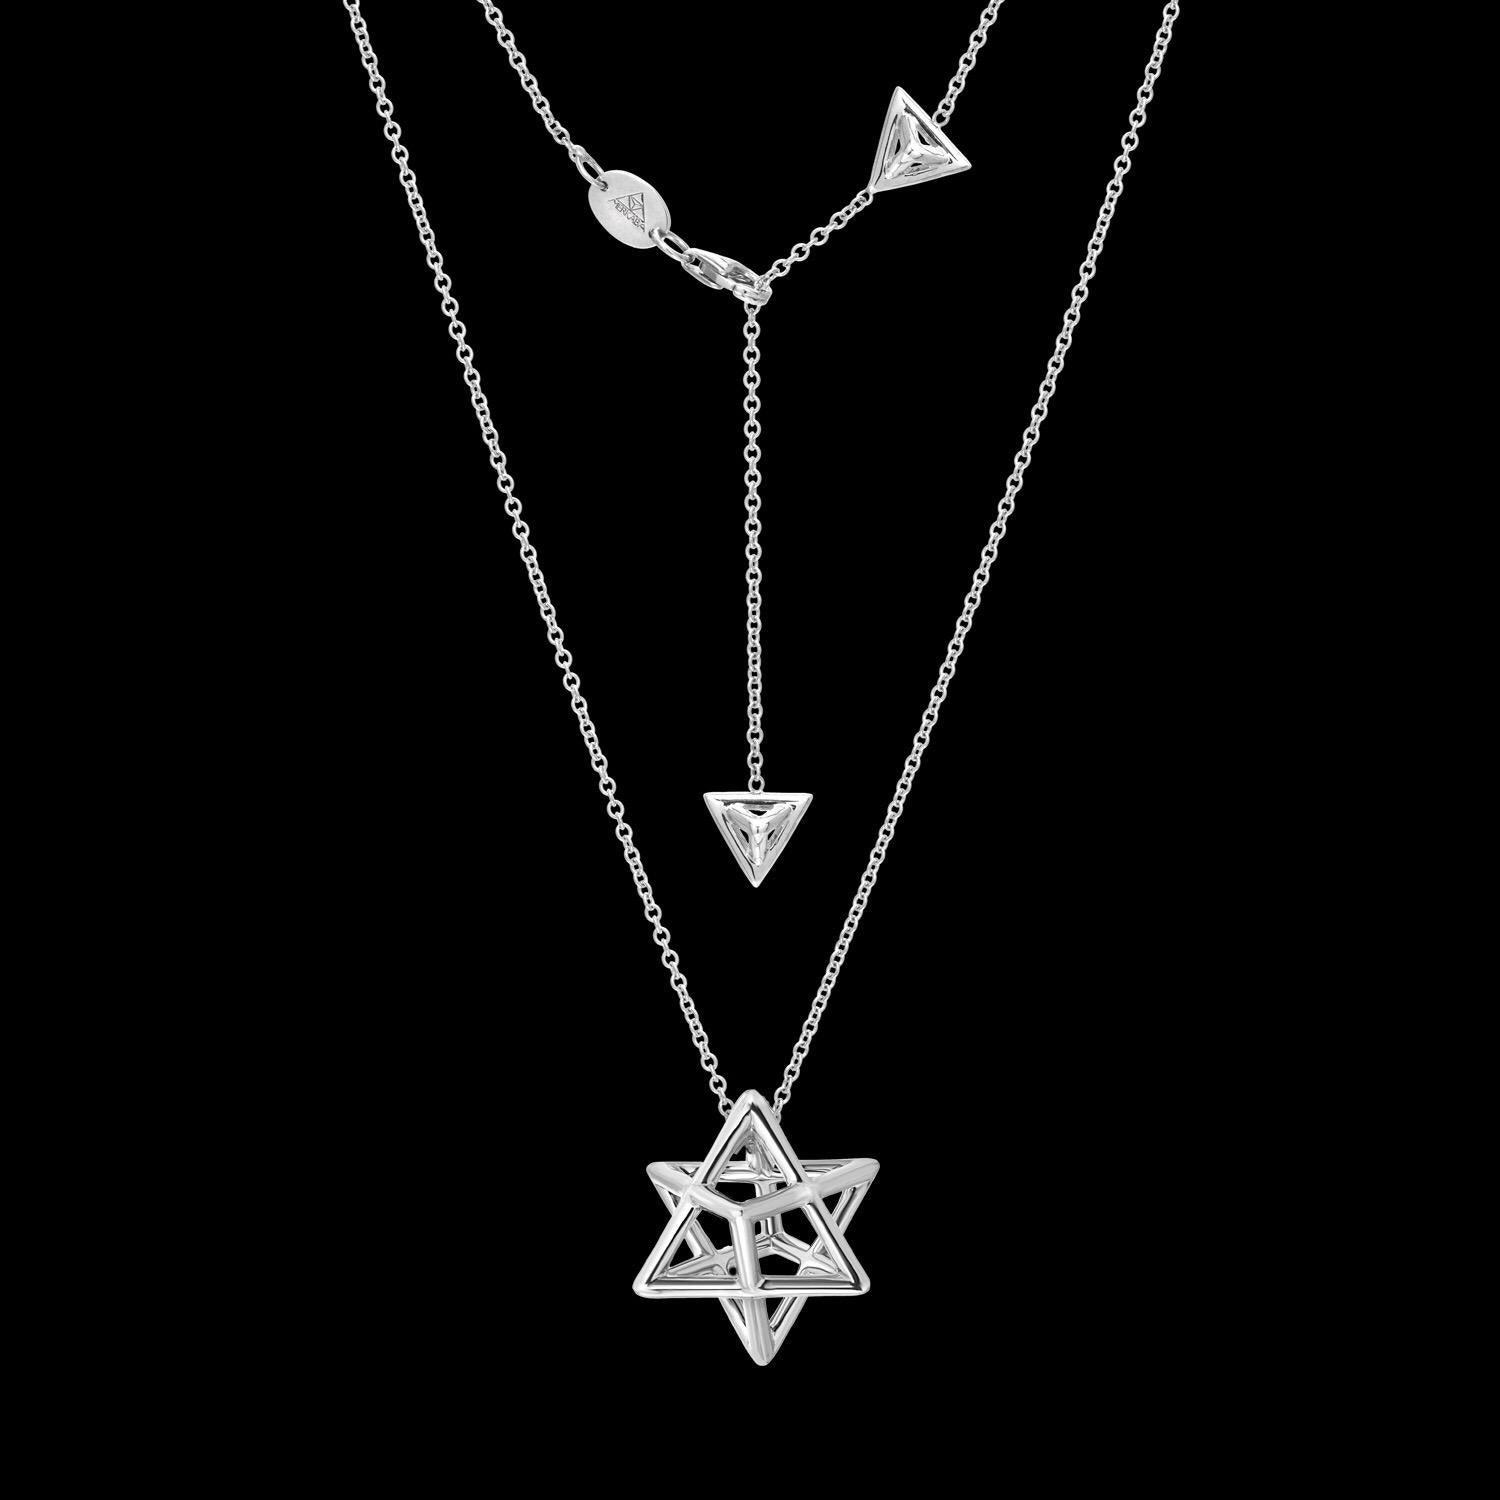 Merkaba platinum, three dimensional star tetrahedron pendant necklace, is a heirloom-quality, sacred geometric unisex jewelry piece, highlighting superb attention to detail and extraordinary polish, symmetry and equilibrium. It suspends elegantly at